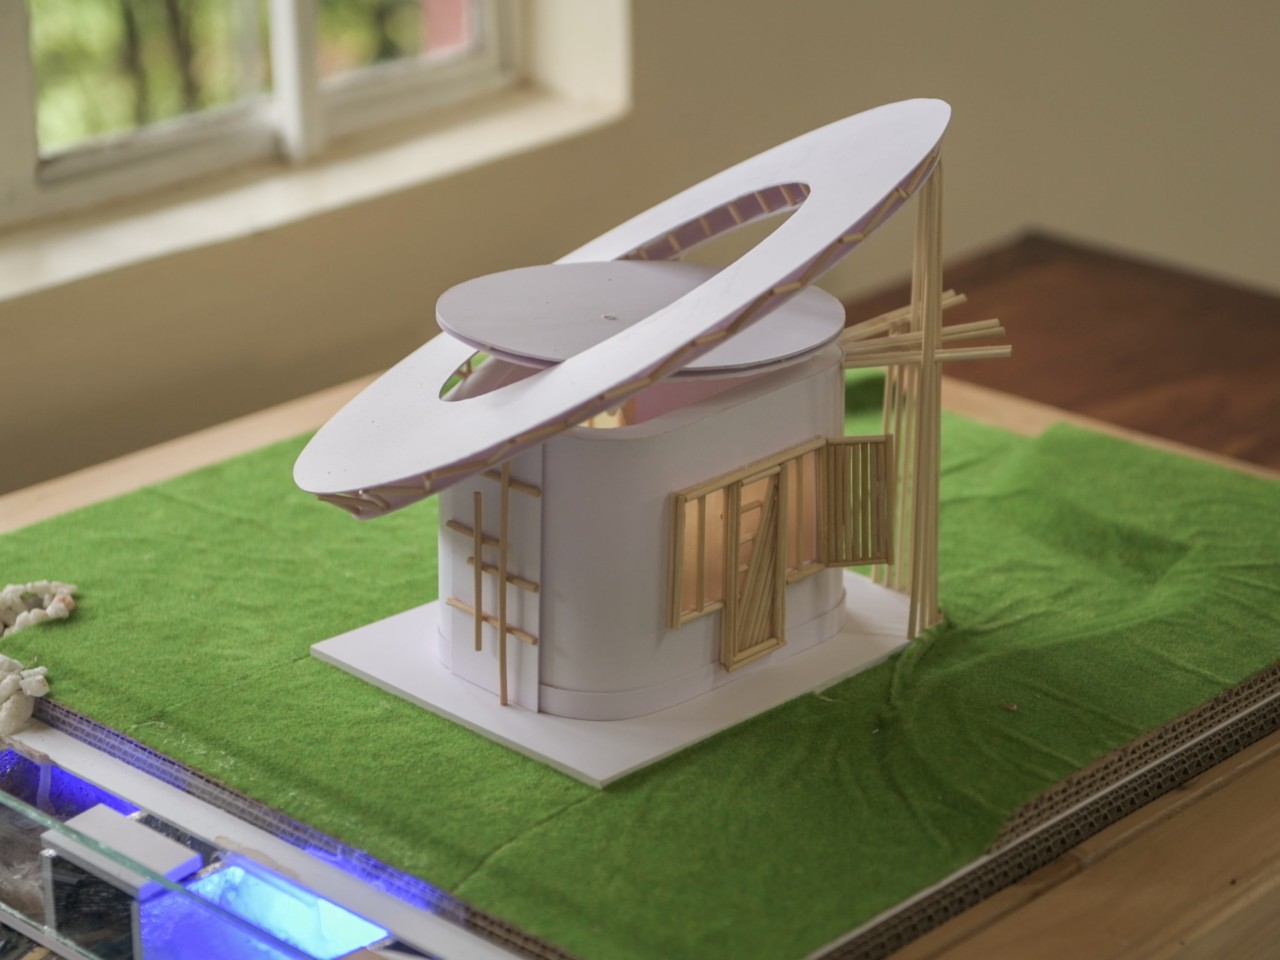 Model of small building with a slanted circular roof